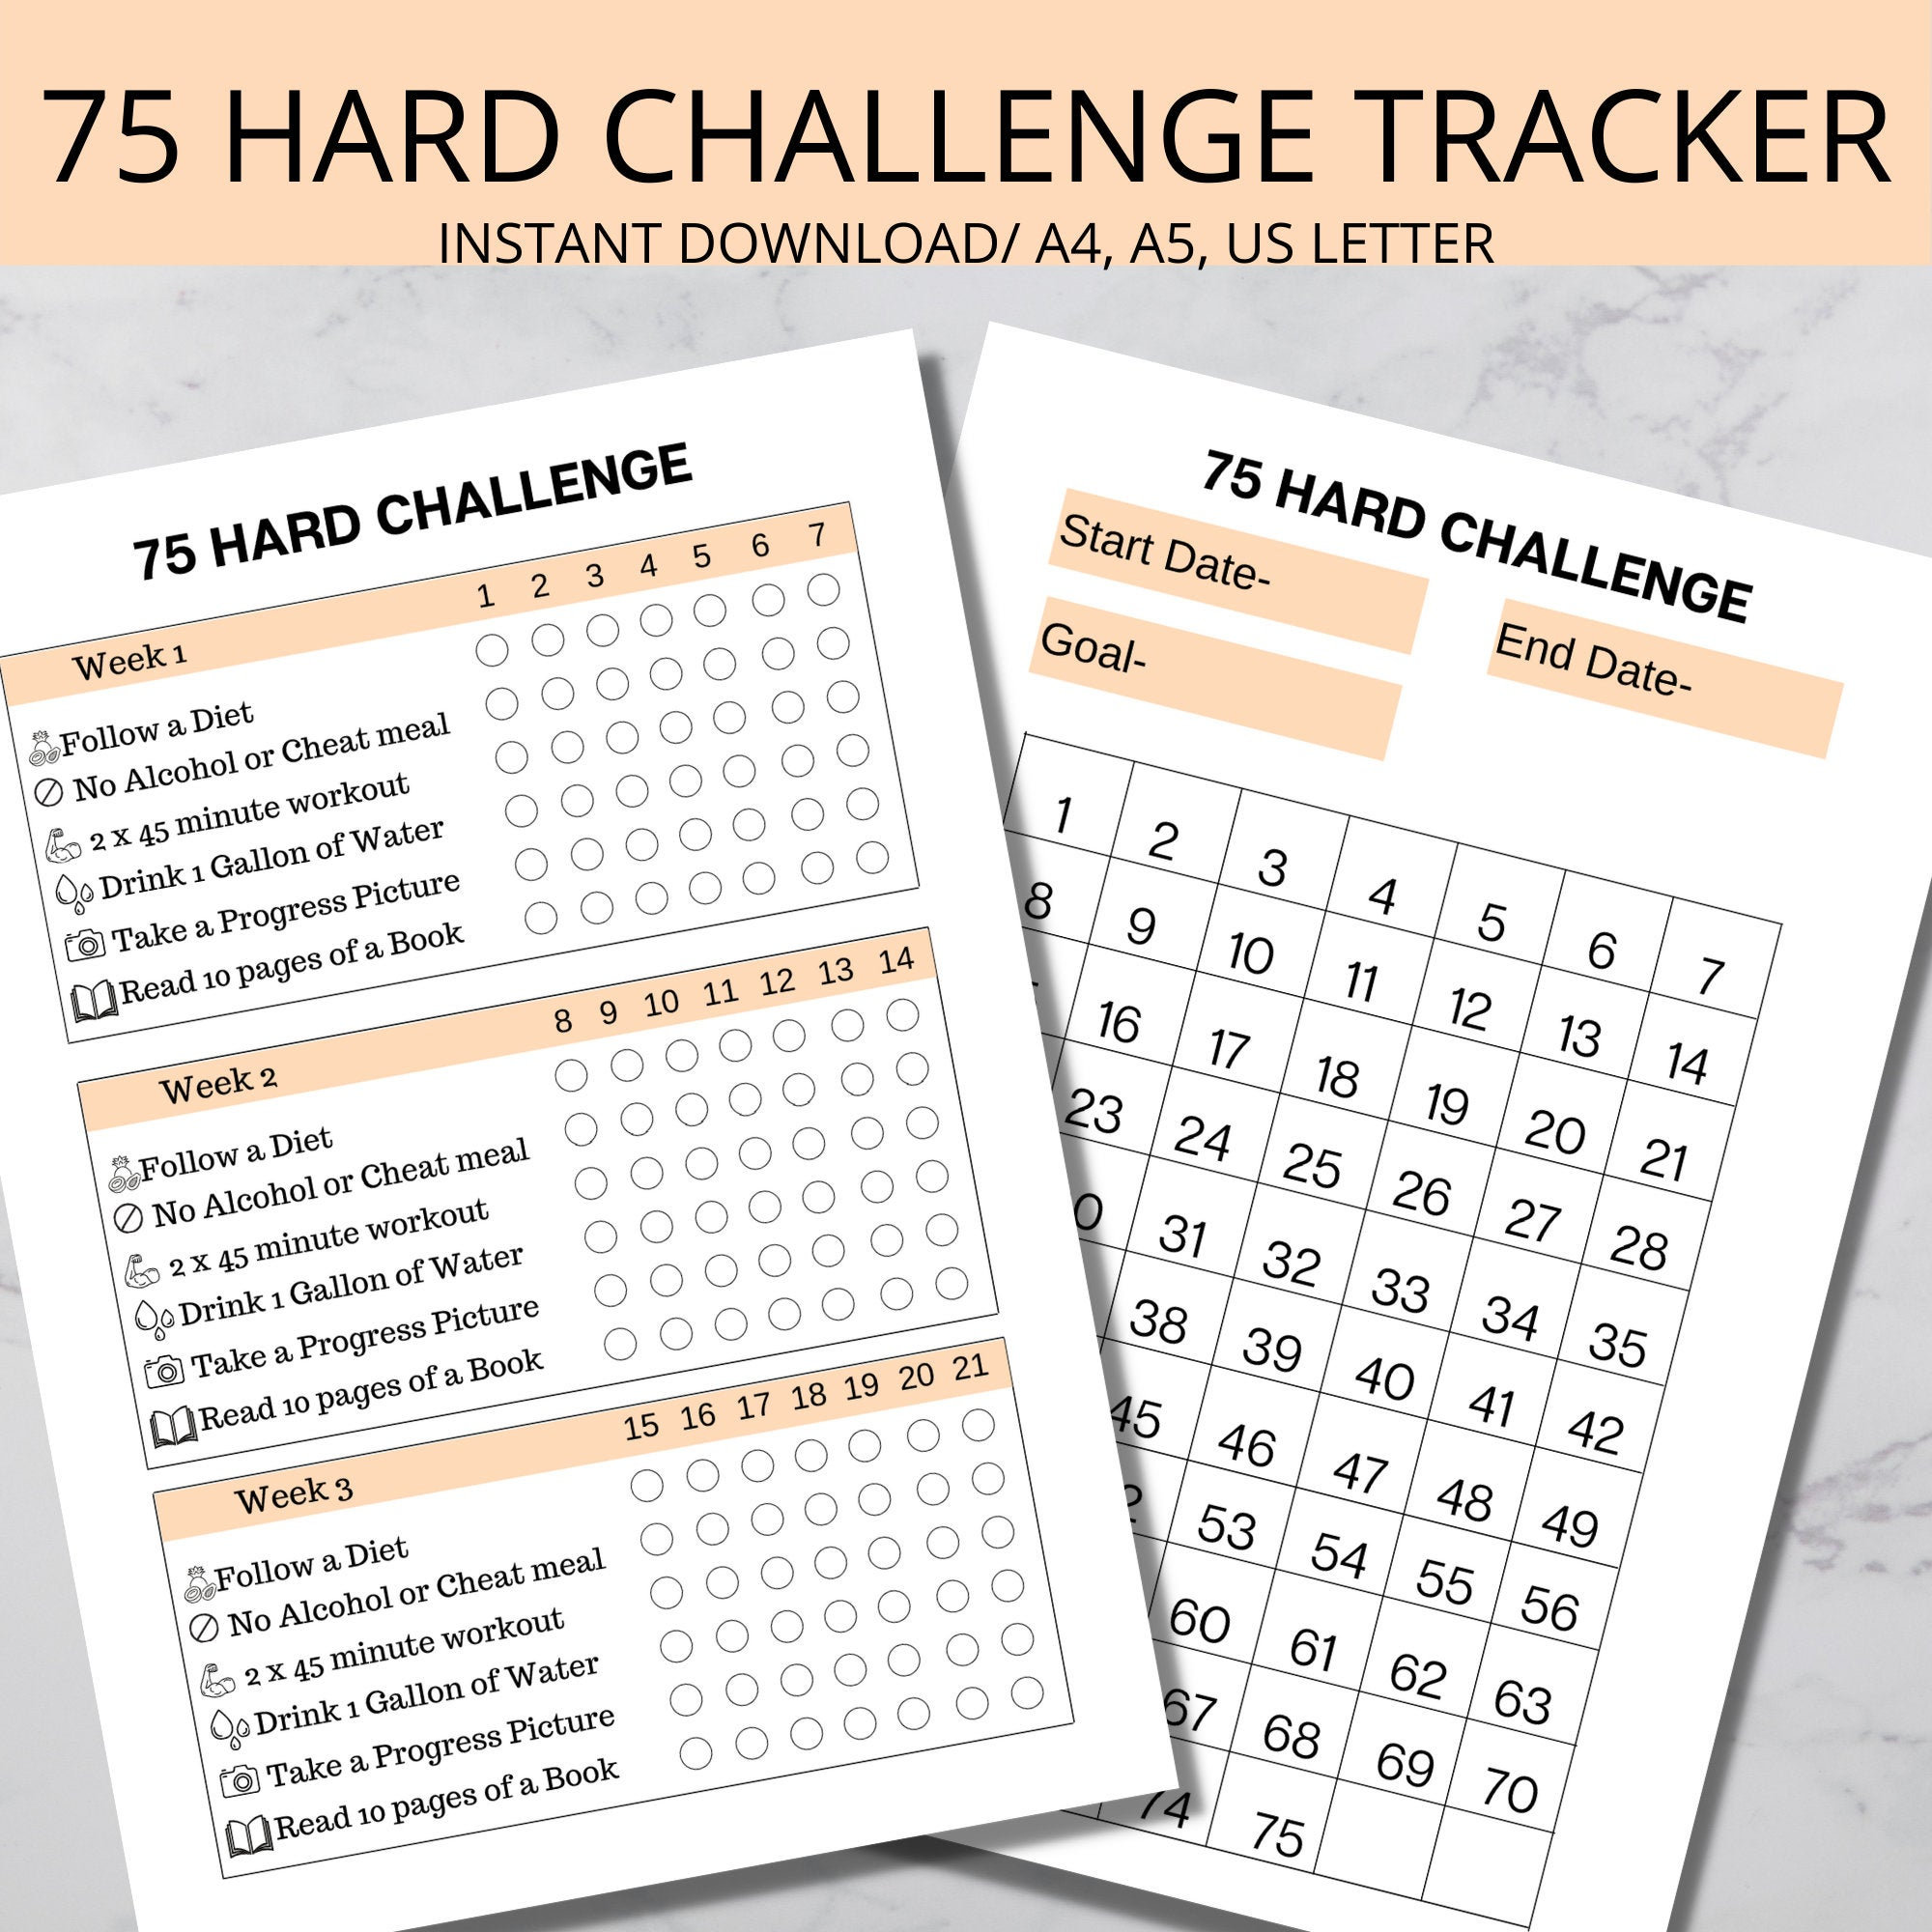 pdf-us-letter-size-weekly-monthly-diet-exercise-healthy-resolution-75-hard-challenge-tracker